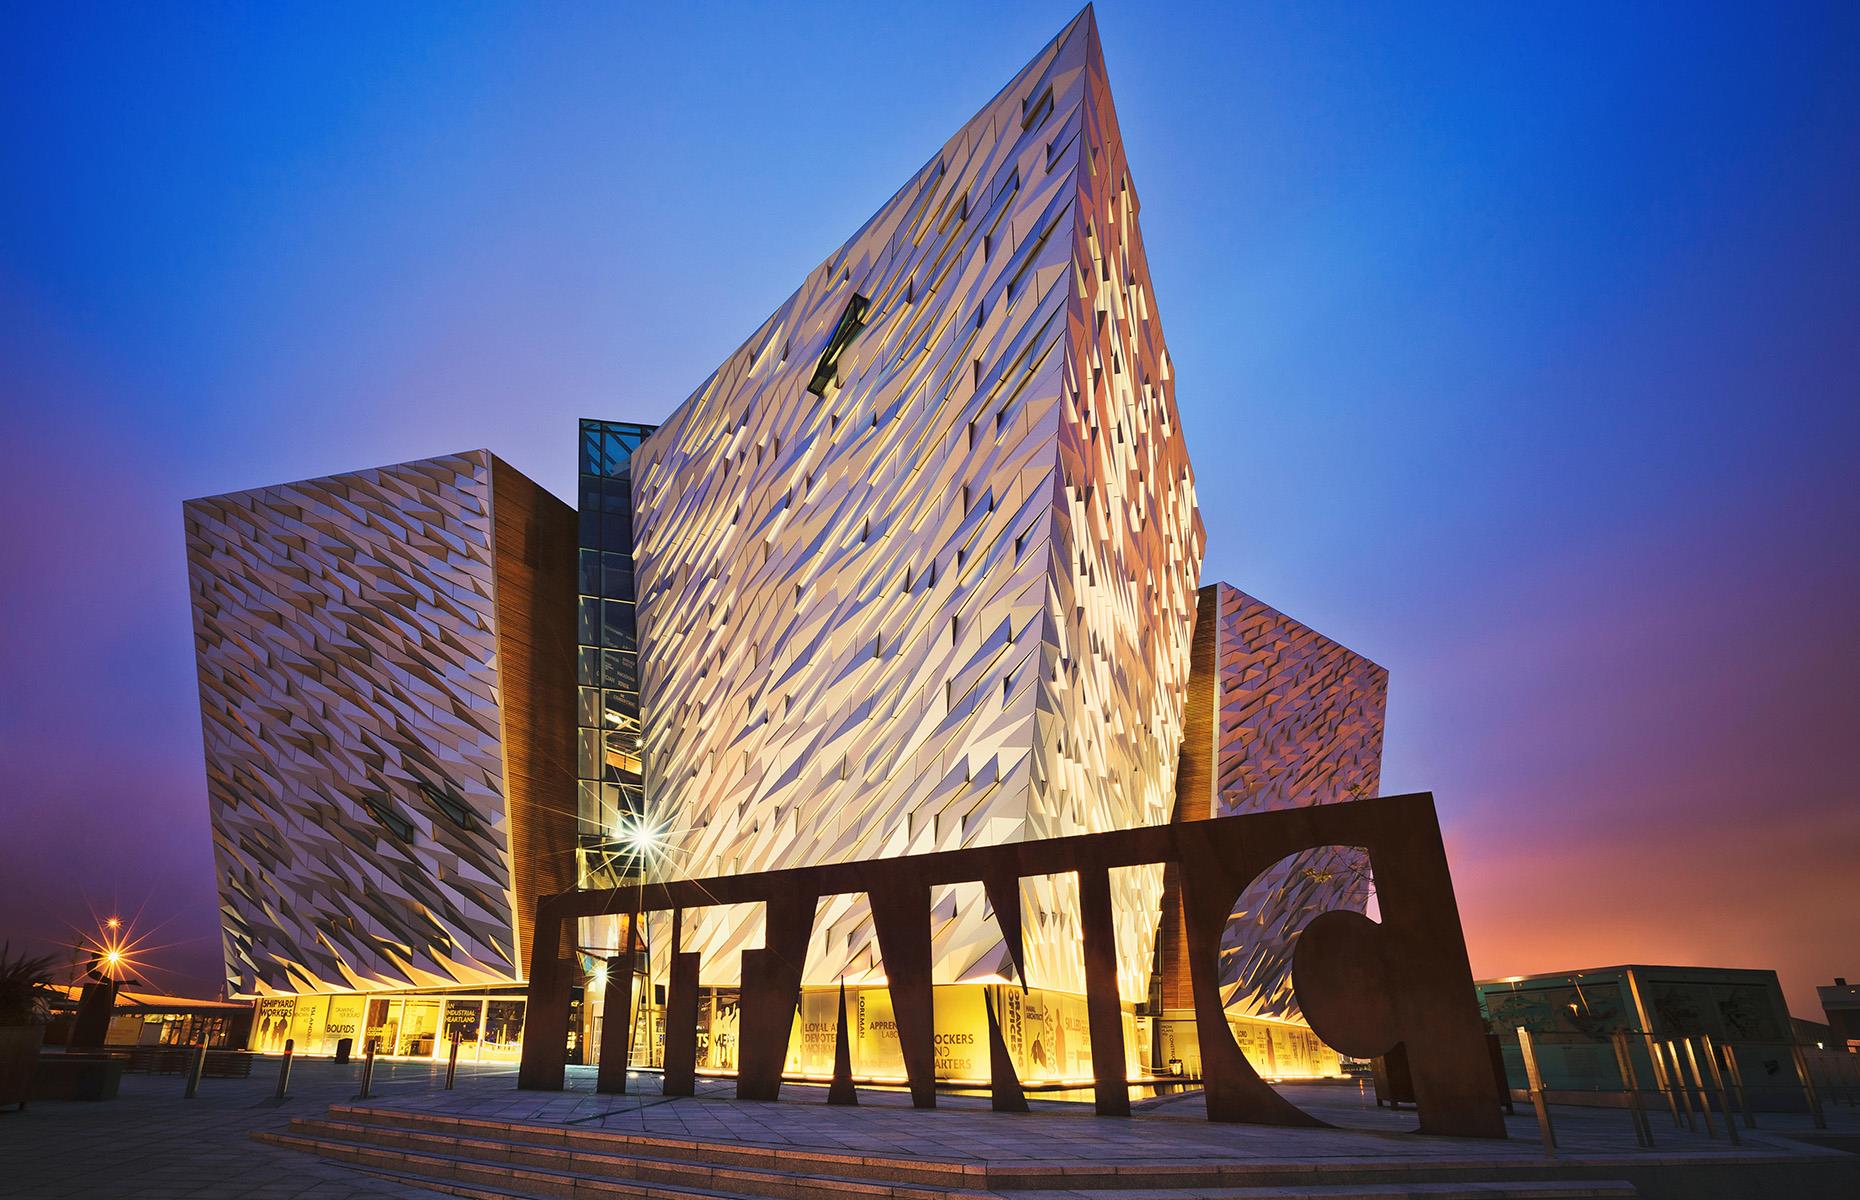 <p>Located on the very spot where the ill-fated ship was designed, built, and launched, <a href="https://www.titanicbelfast.com/explore/">Titanic Belfast</a> is a world-leading tourist attraction which takes visitors on an immersive journey from the bustling boomtown of early 19<sup>th </sup>century Belfast, through the conception and construction of the RMS Titanic. You'll also learn what life was like on board the completed ship and within the cabins of various classes, and finally the story culminates in the tragic sinking and devastating aftermath, with one of the largest collections of salvaged artifacts in the world.</p>